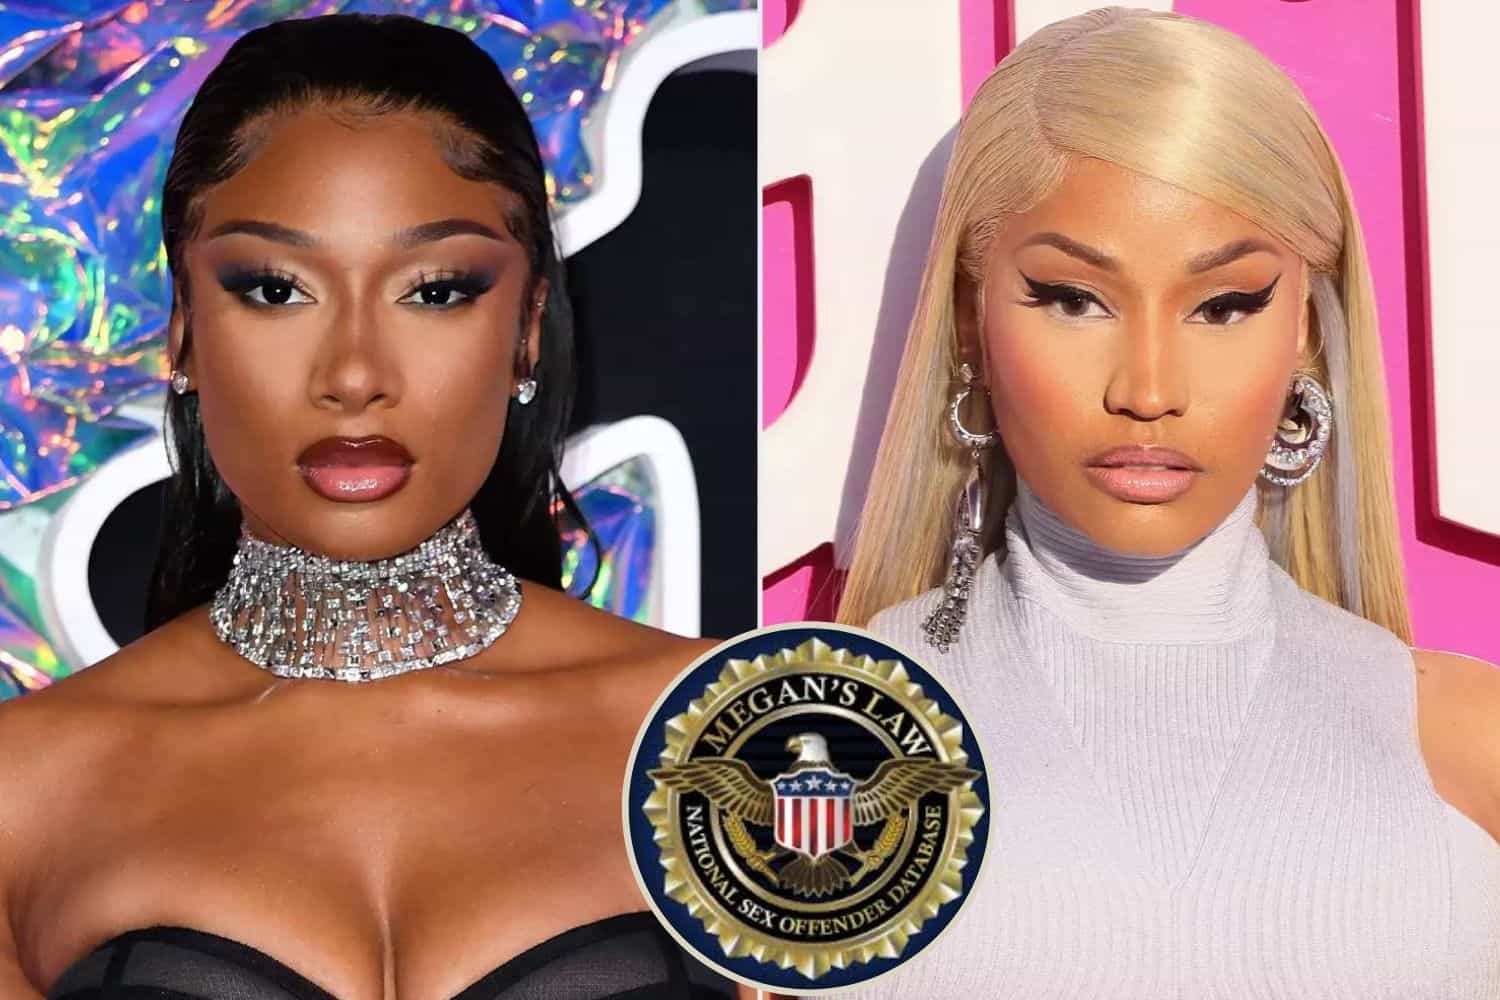 Kanka Family Criticizes Megan Thee Stallion for Offensive ‘Megan’s Law’ Reference in ‘Hiss